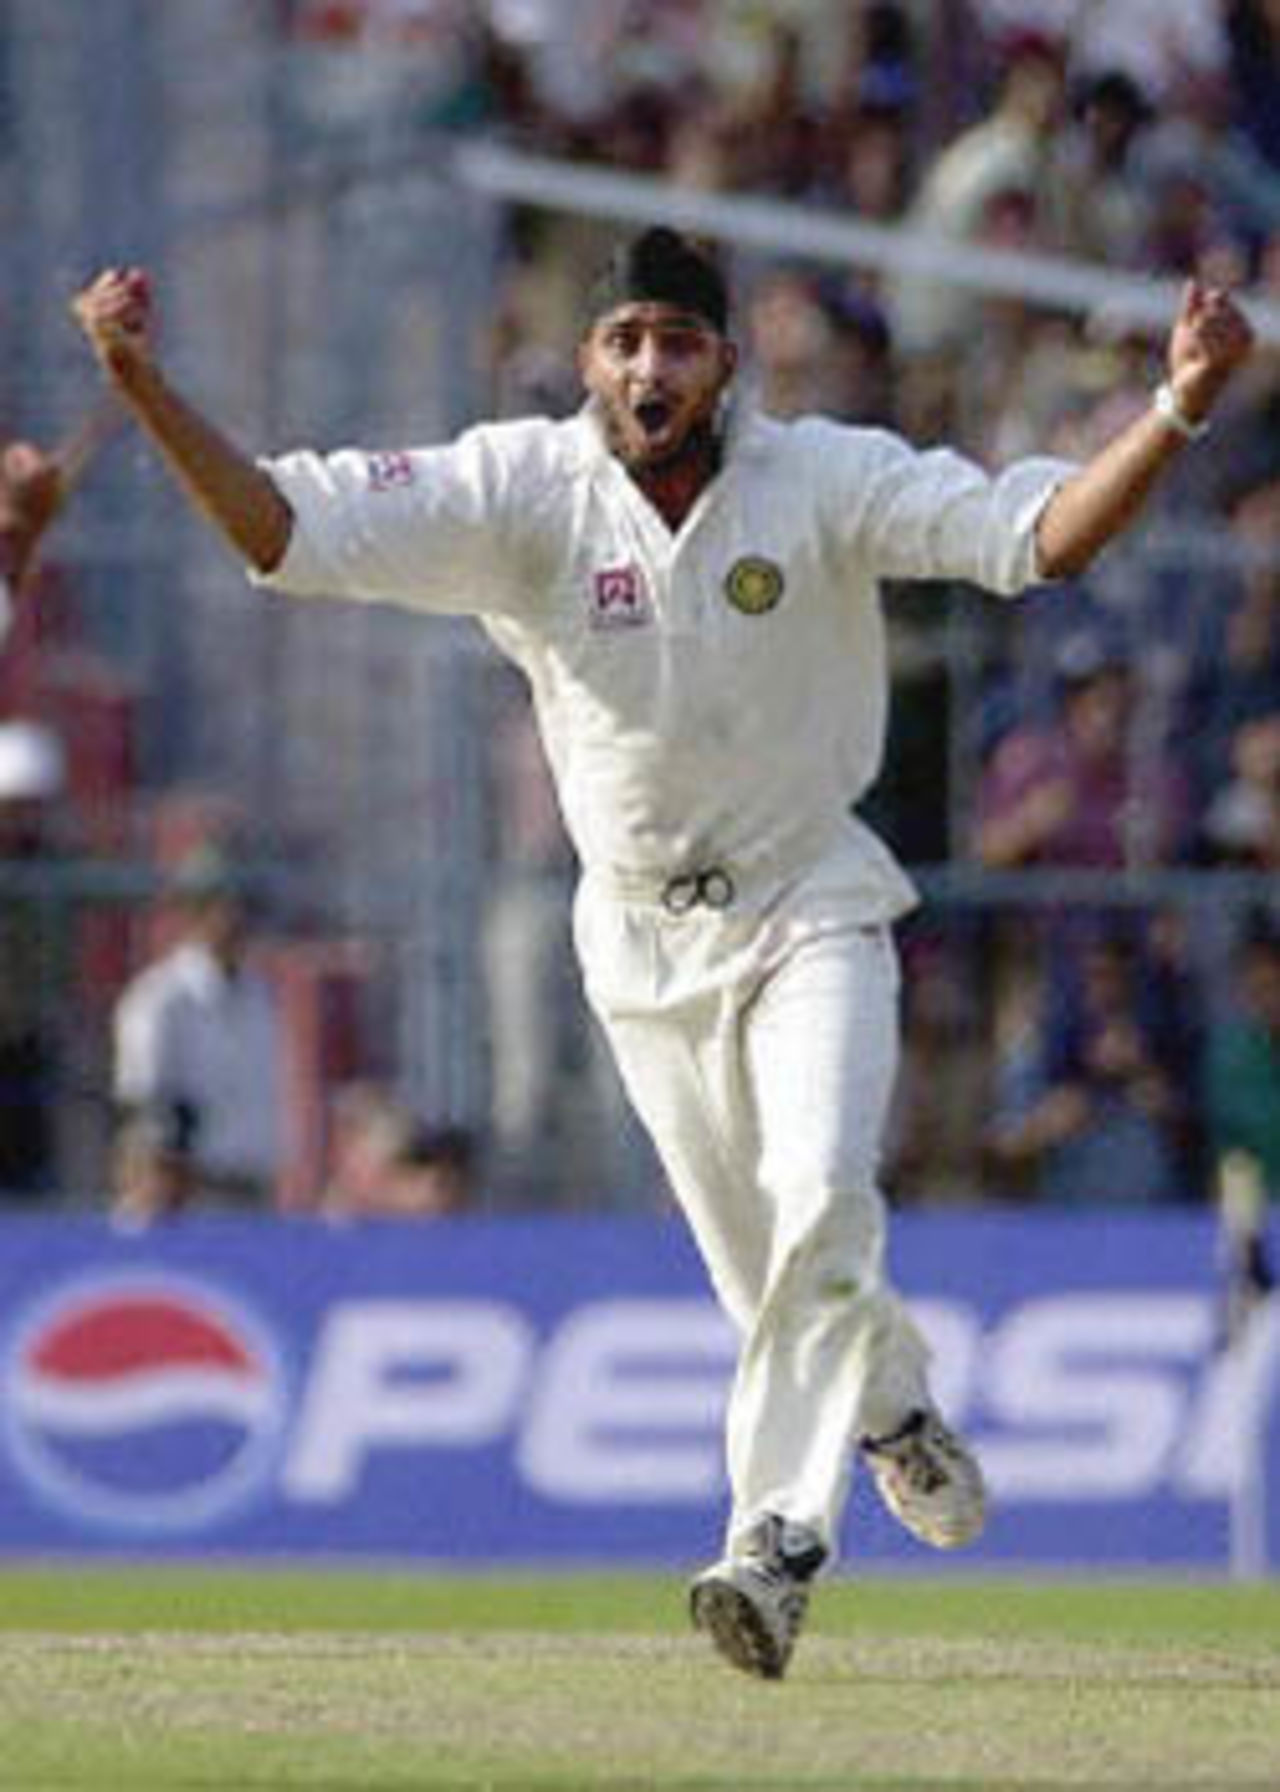 11 March 2001: Indian spinner Harbhjan Singh celebrates after claiming Australian player Shane Warne's wicket to complete a hat-trick on the first day of the second test match between India and Australia at Eden Gardens in Calcutta.